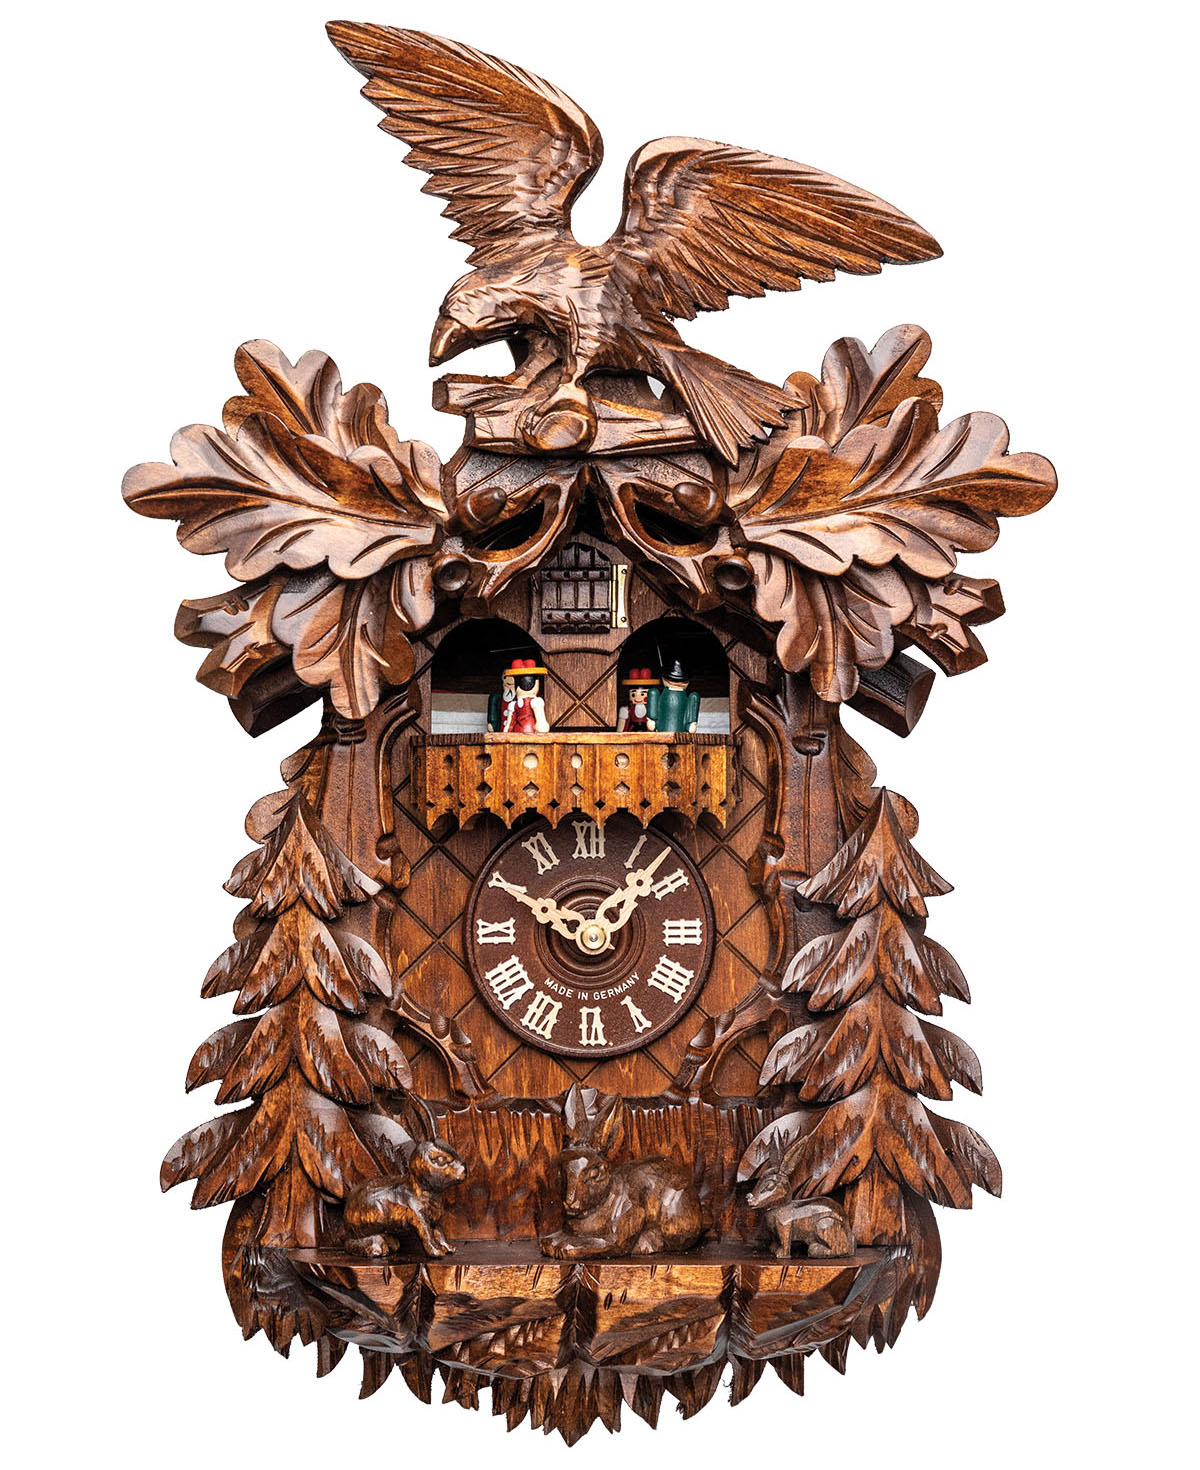 An intracate wooden cuckoo clock with a large bird on top